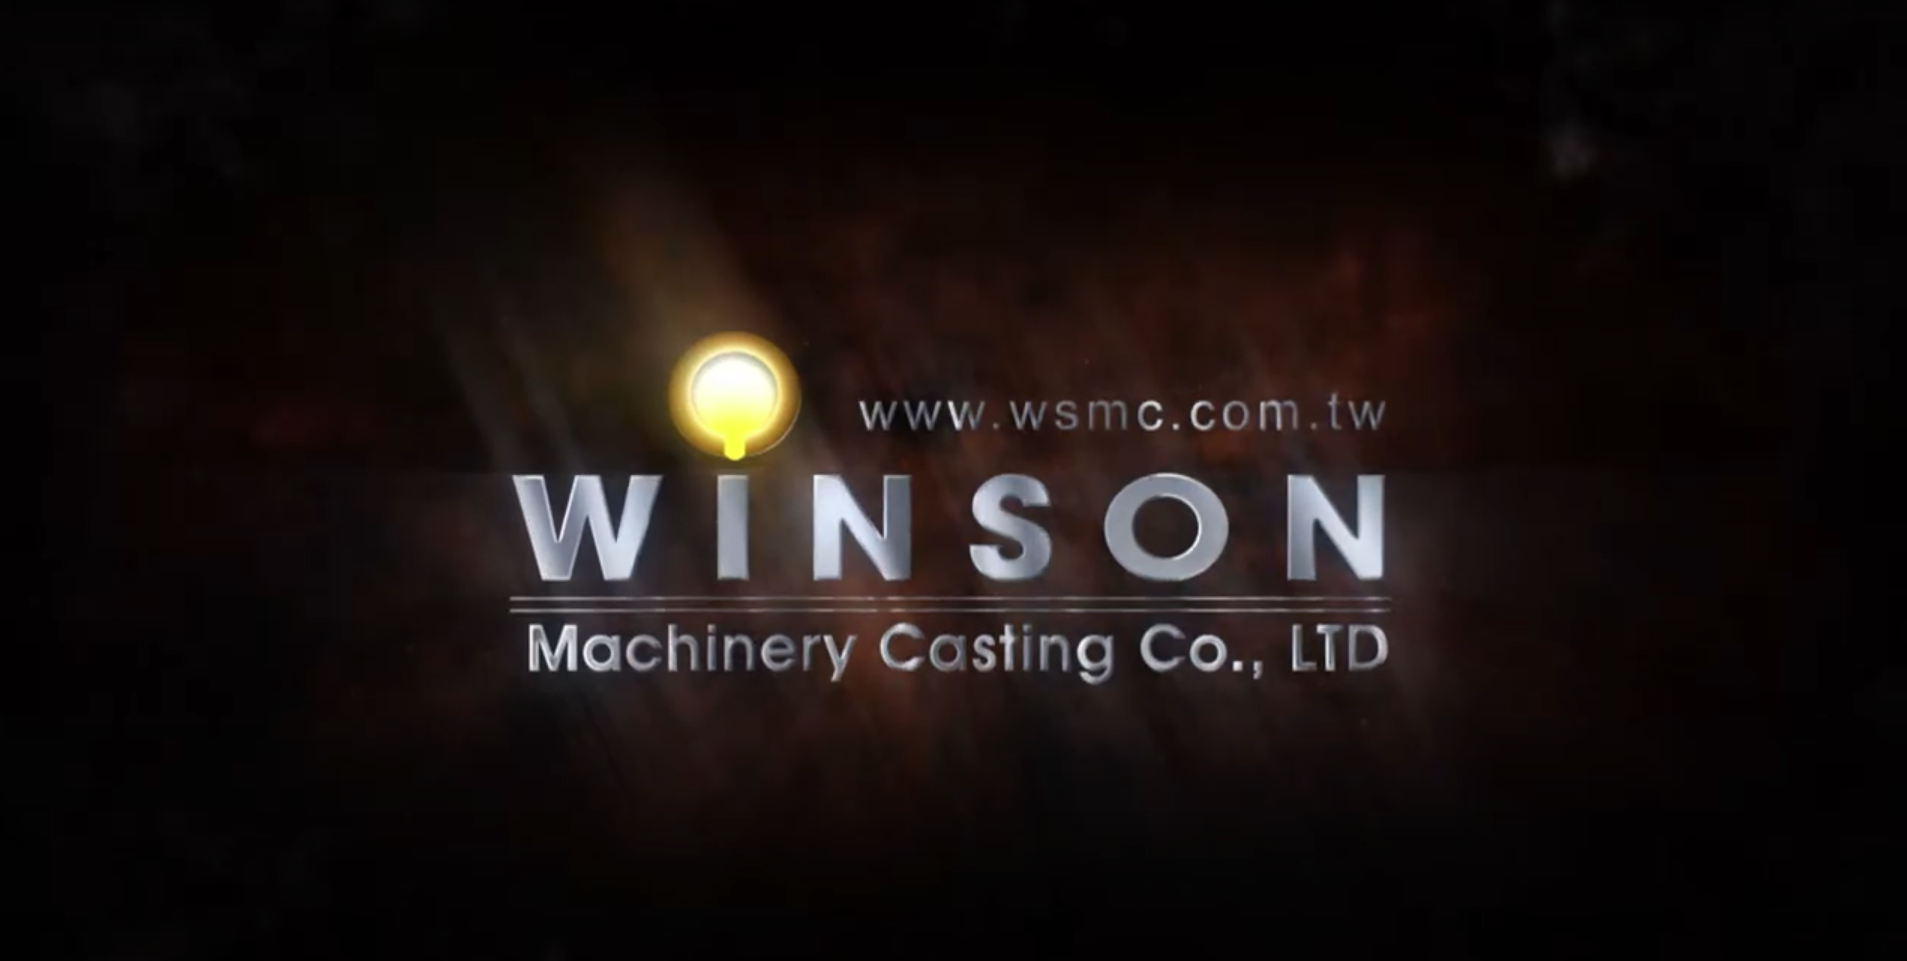 Video|Introduction of WINSON Machinery